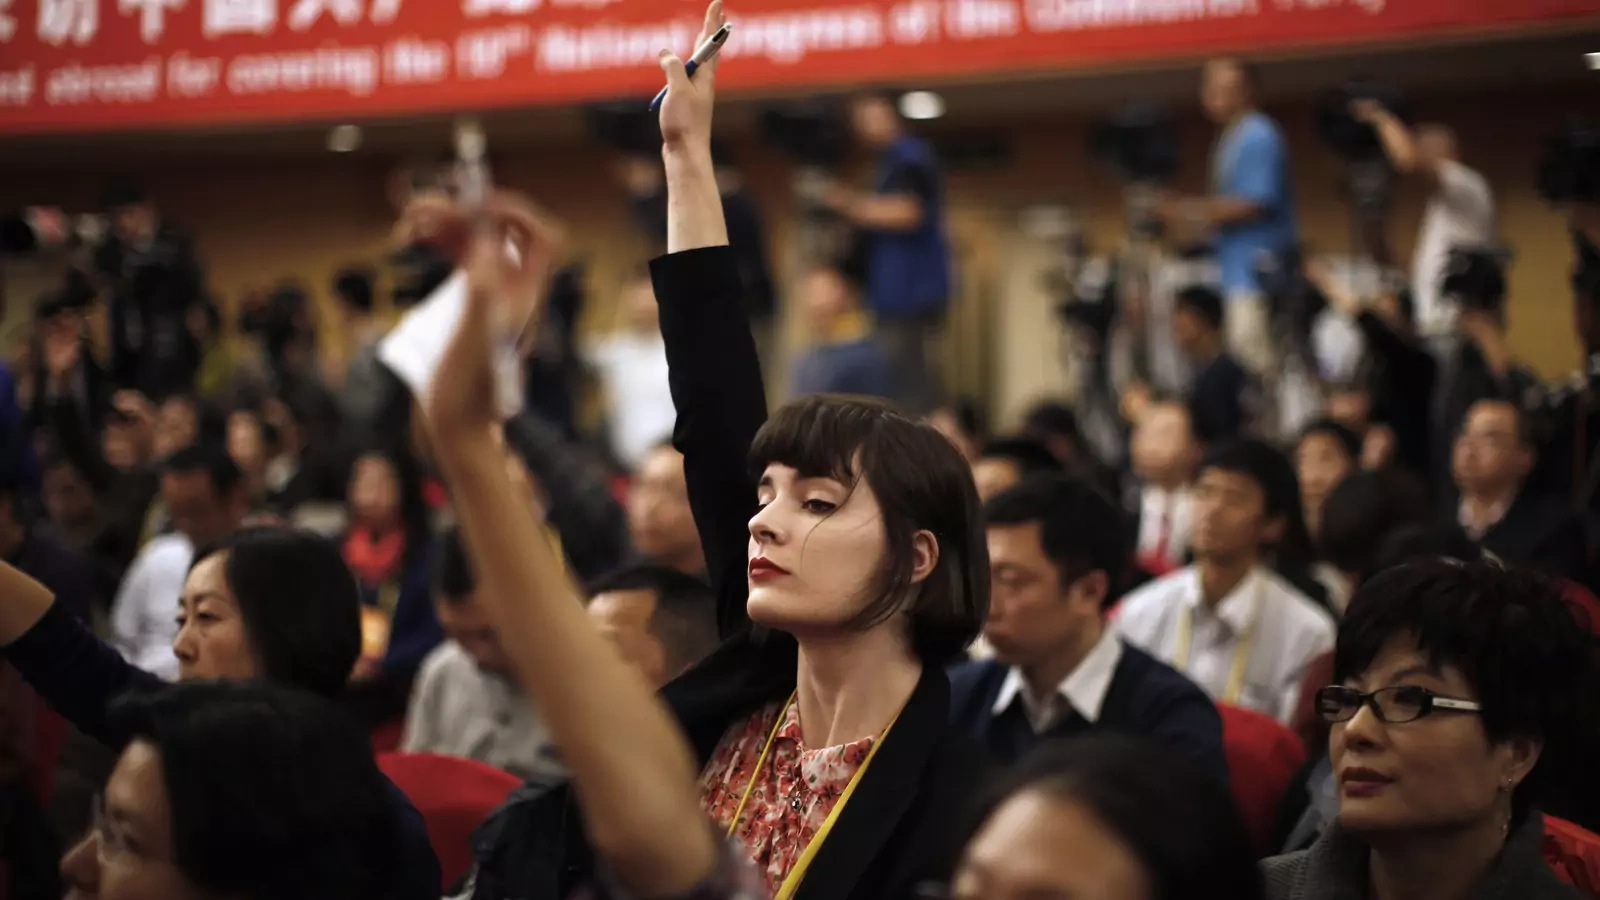 A journalist from Global CAMG Media Group asks a question during a news conference in Beijing on November 12, 2012. Melbourne-based Global CAMG Media Group is majority owned by China Radio International, the country’s state run radio network.